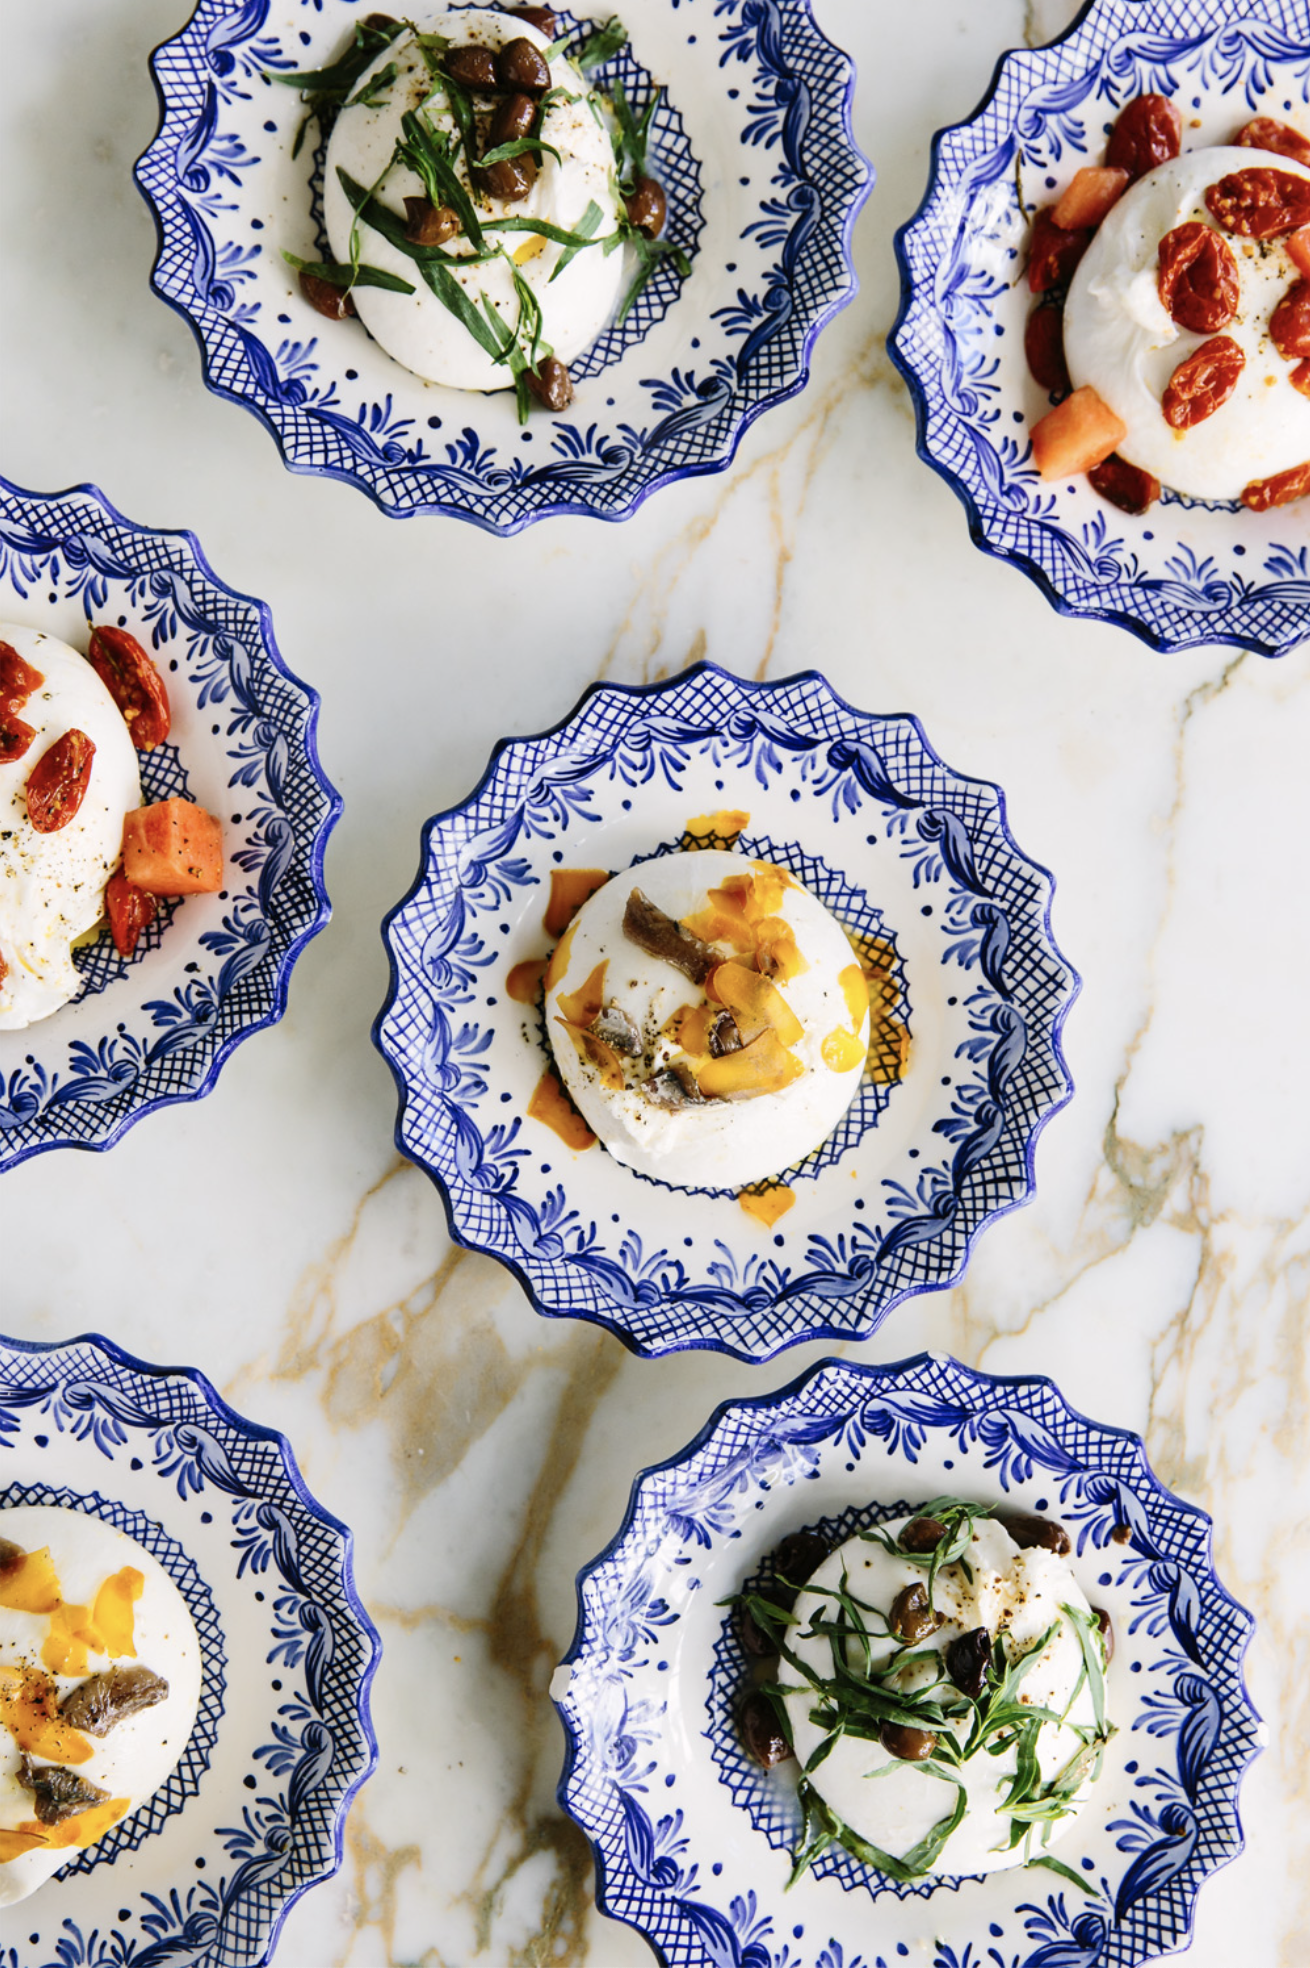 A variety of burrata scoops served on hand-painted blue and white ceramic plates at Pink Mamma